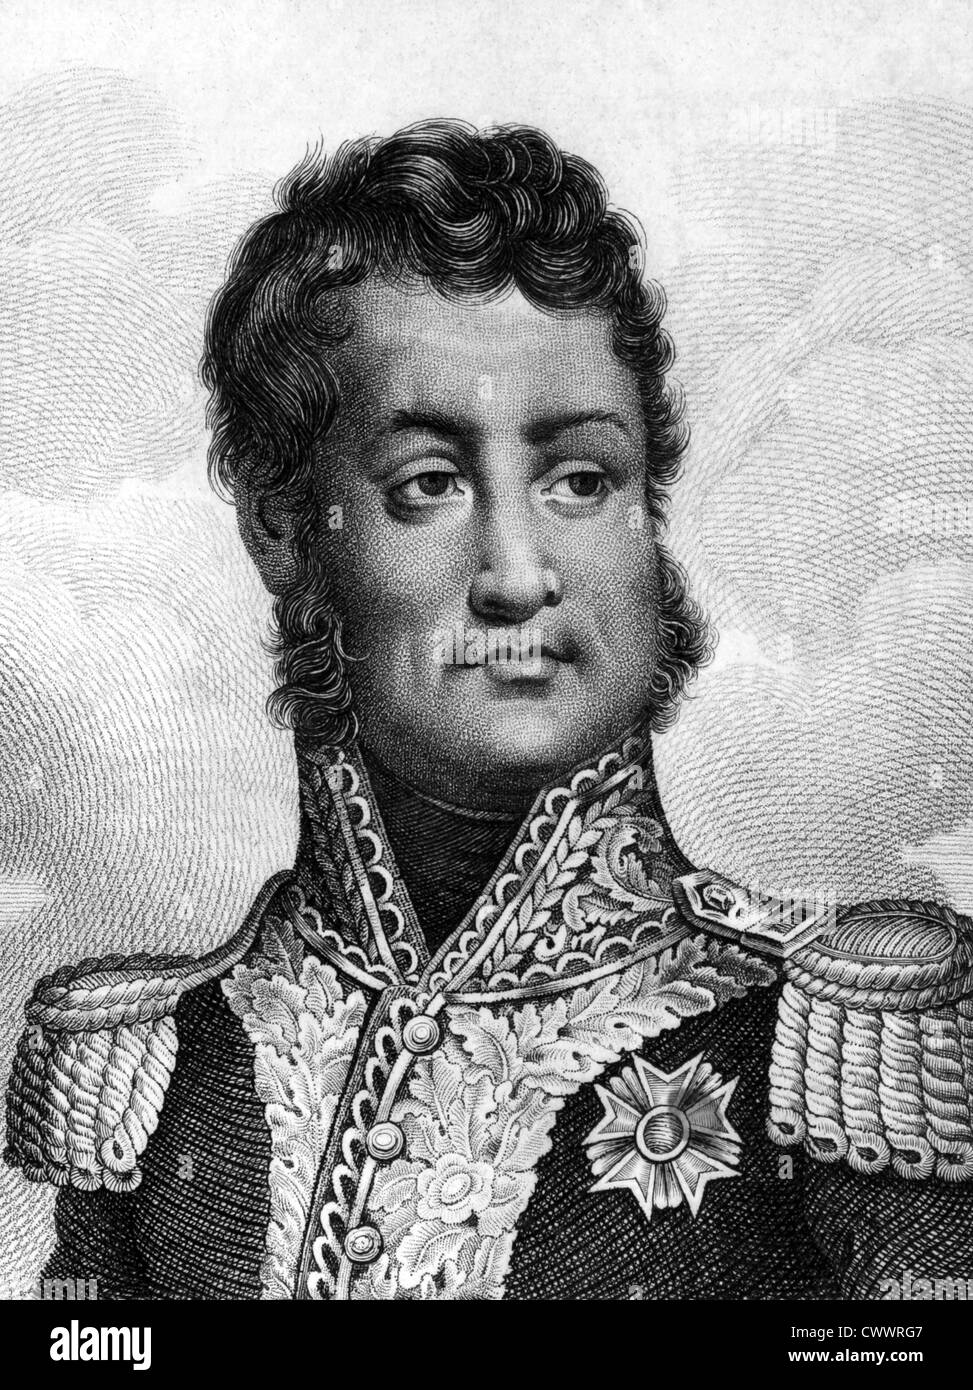 Louis Philippe I (1773-1850) on engraving from 1859. King of France during 1830-1848. Stock Photo